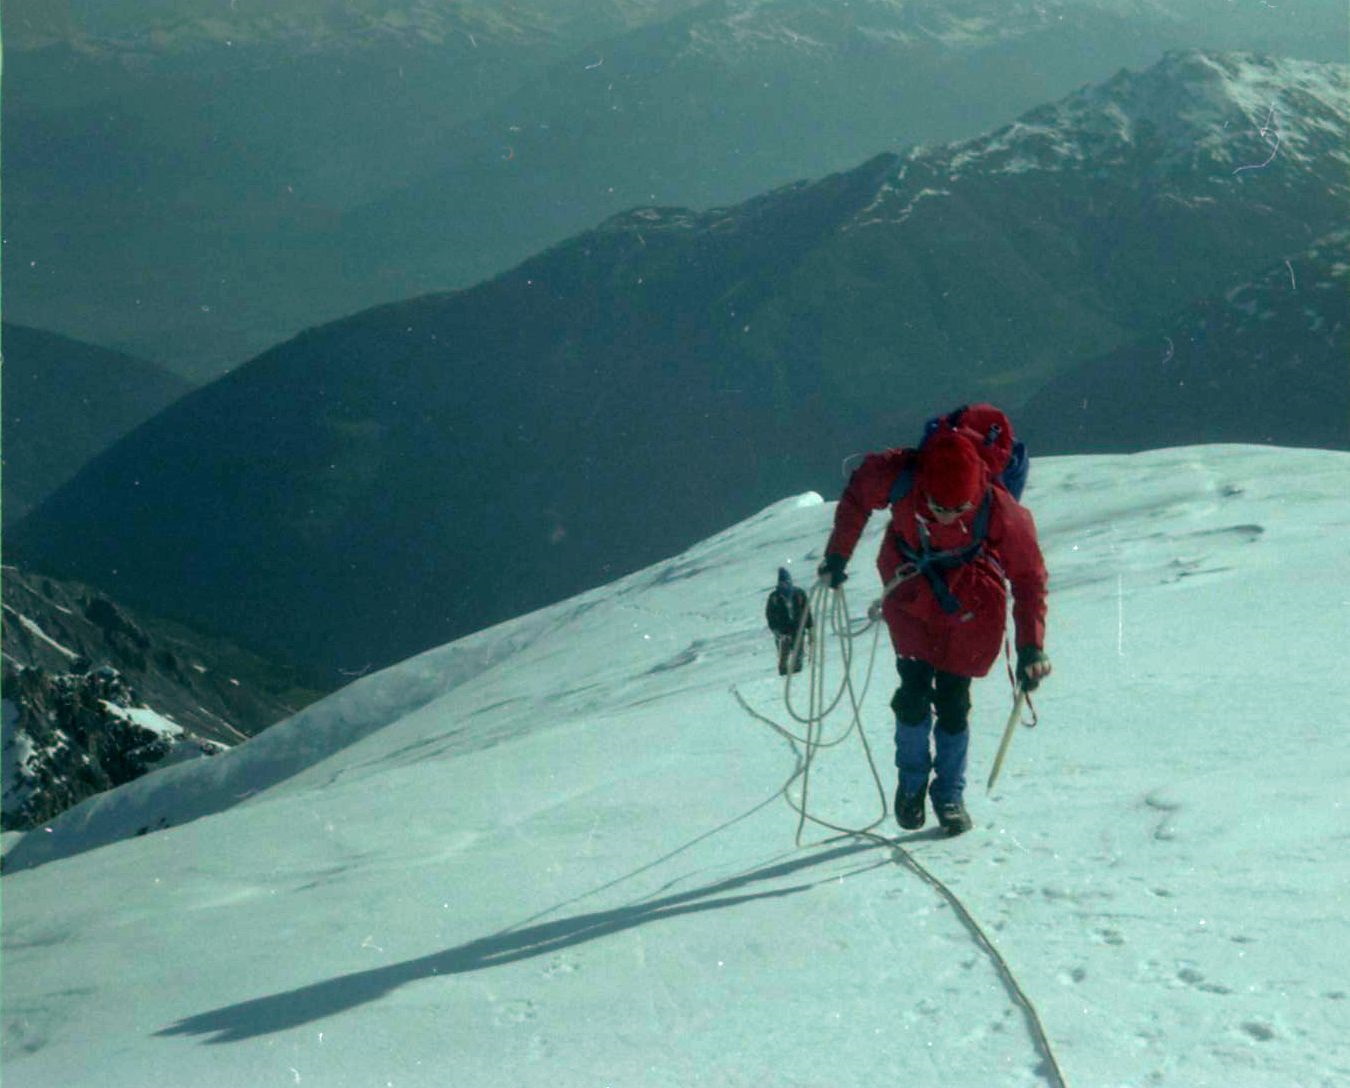 Approach to summit of Ortler ( Cima Ortles )